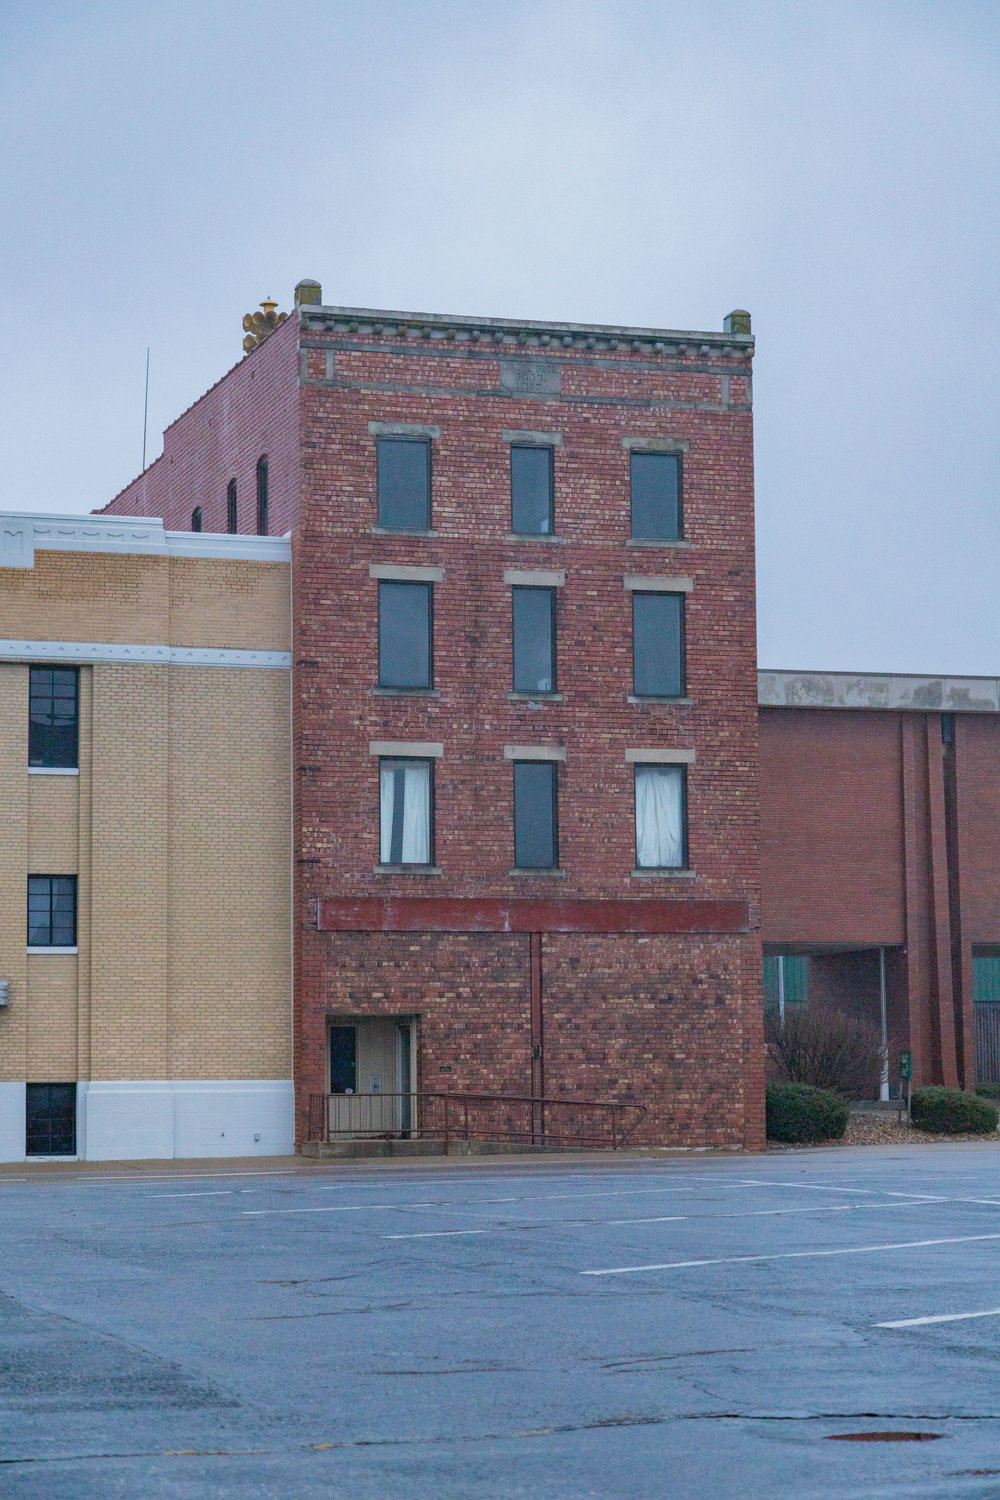 The former Kelly Hotel is at the center of a plan to put a hotel in downtown Moberly. The City plans to contract with Bricton Group to lay the groundwork for a developer.